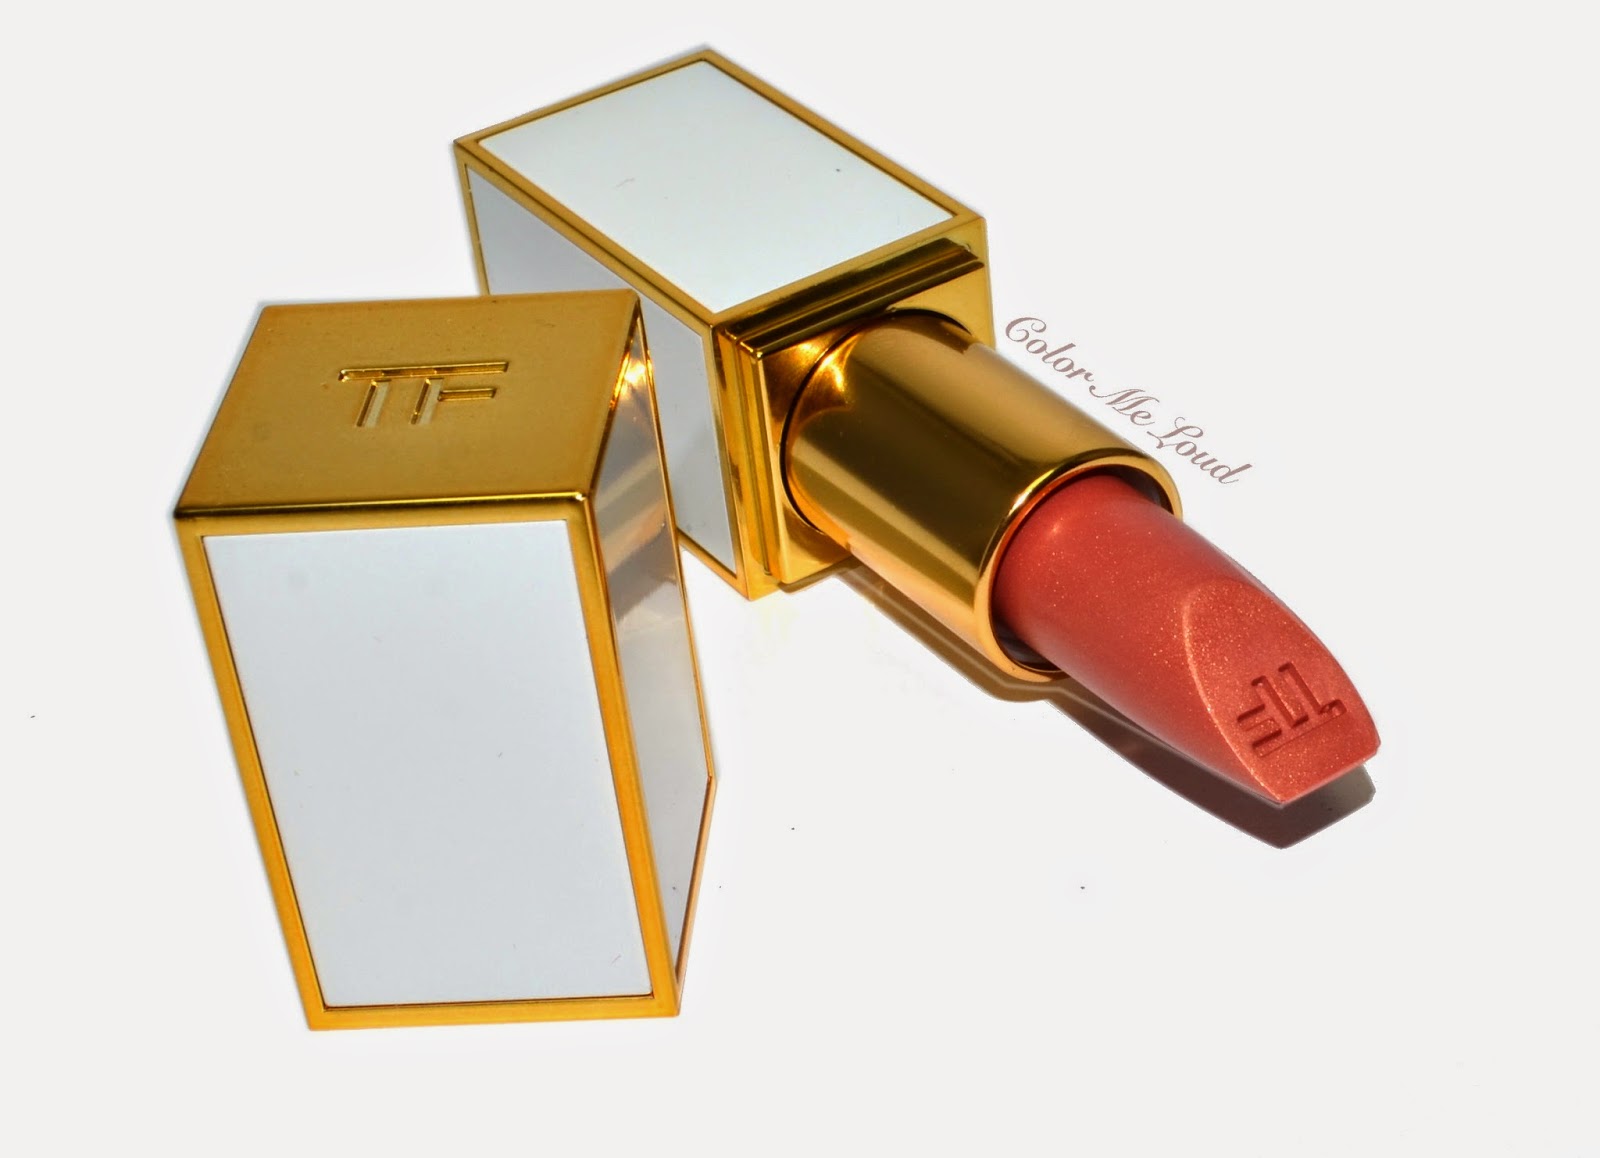 Tom Ford Lip Color Sheer in Skinny Dip, Review, Swatch & FOTD with Spring  Colors | Color Me Loud